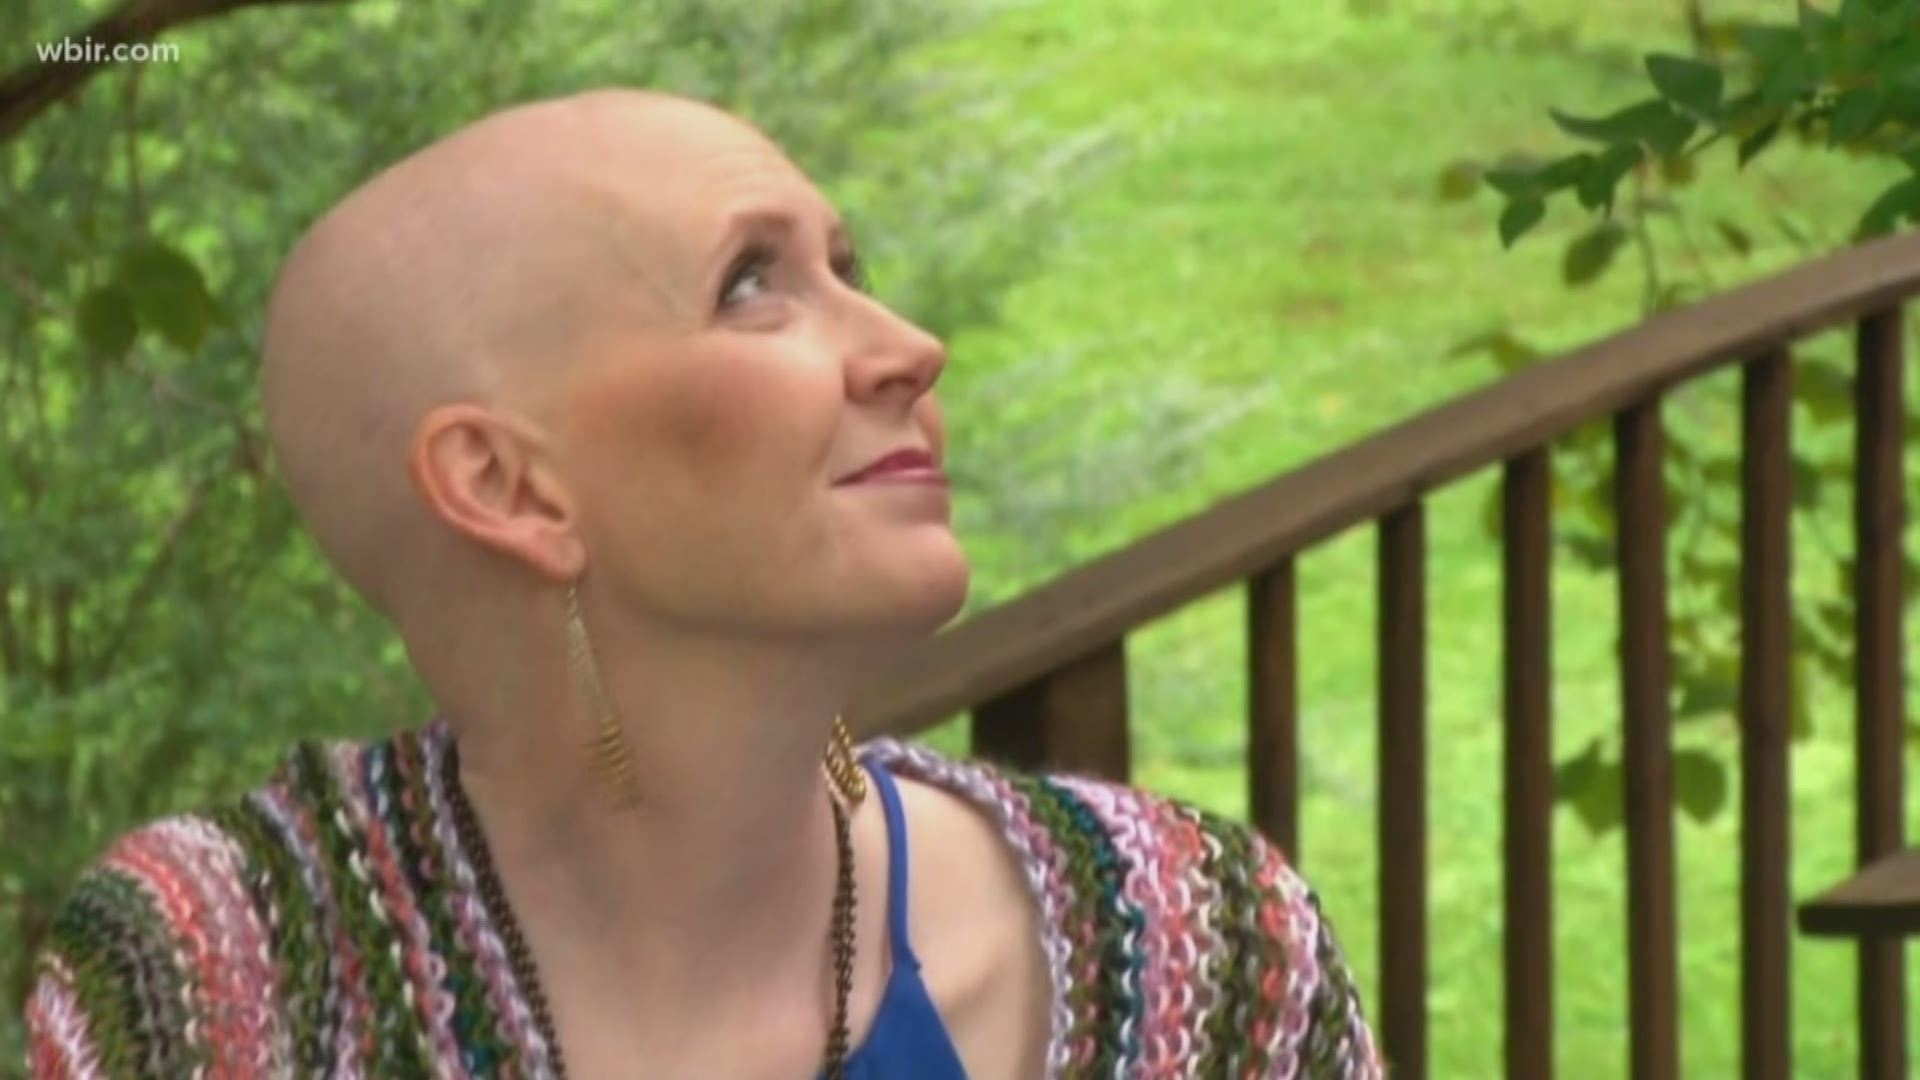 She inspired thousands as she battled cancer. On early Wednesday morning, Megan Stinnett passed away after fighting melanoma since 2013.